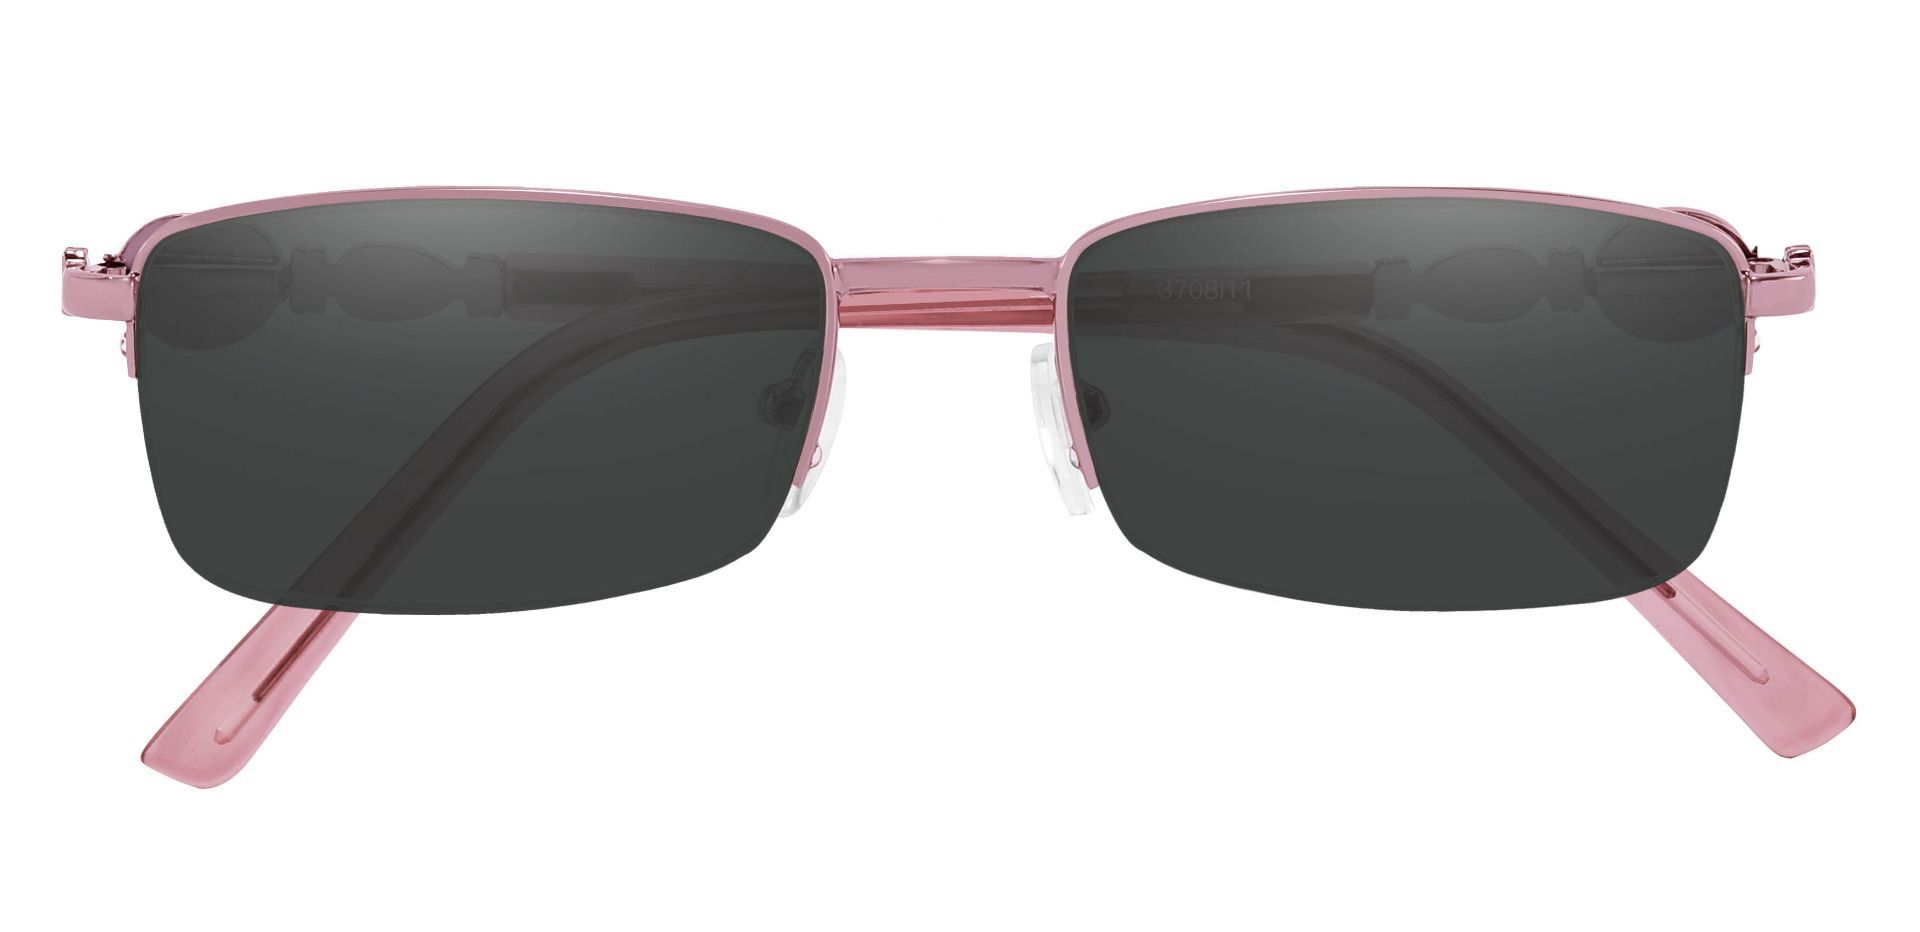 Crowley Rectangle Prescription Sunglasses - Pink Frame With Gray Lenses